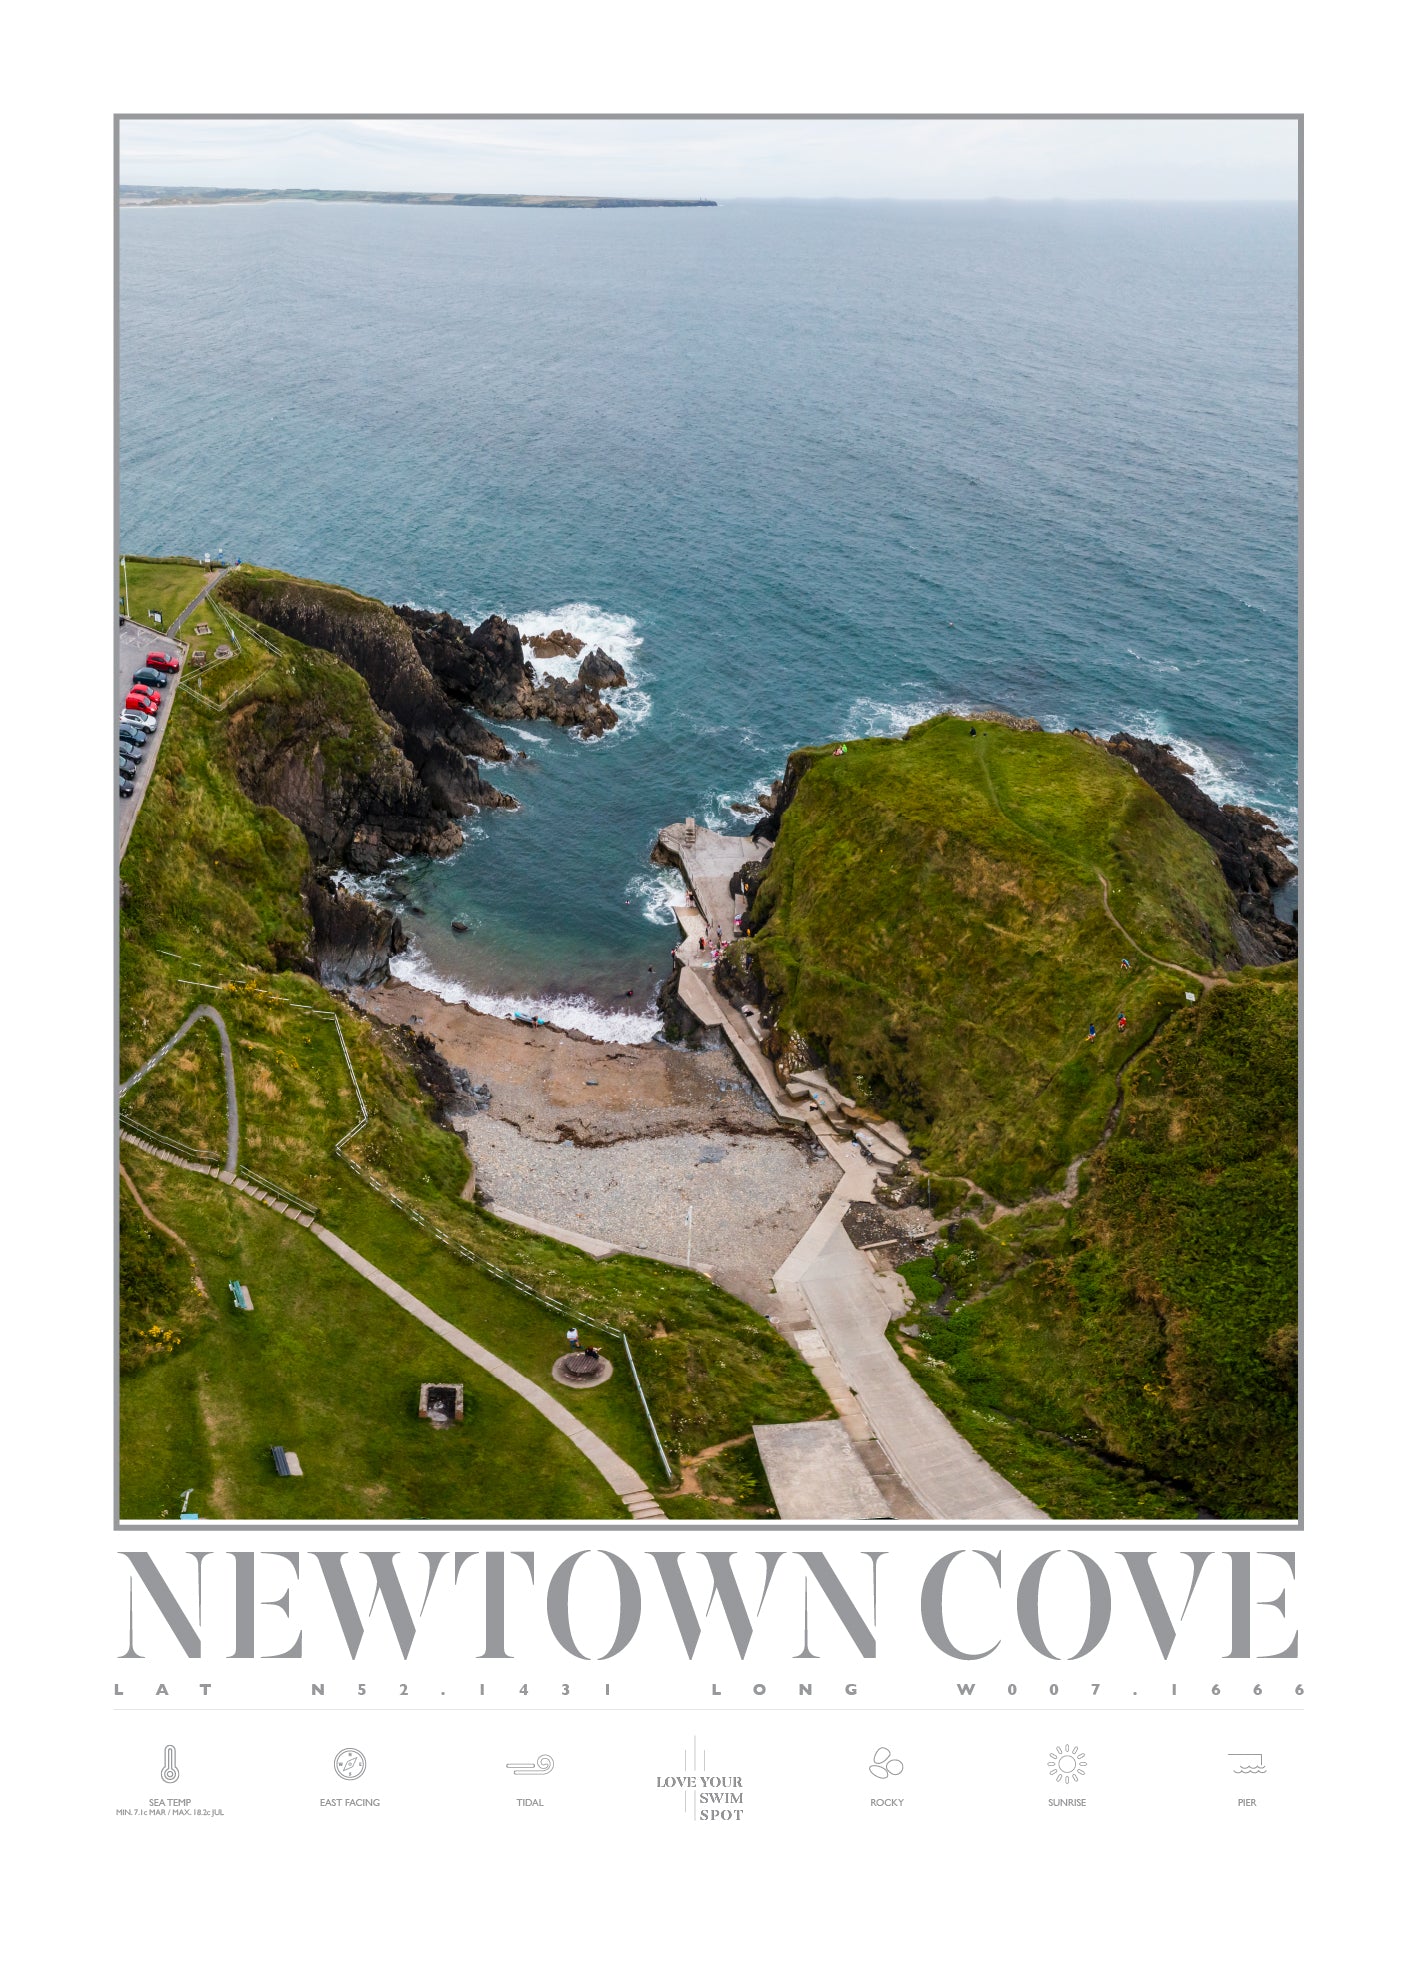 NEWTOWN COVE WATERFORD